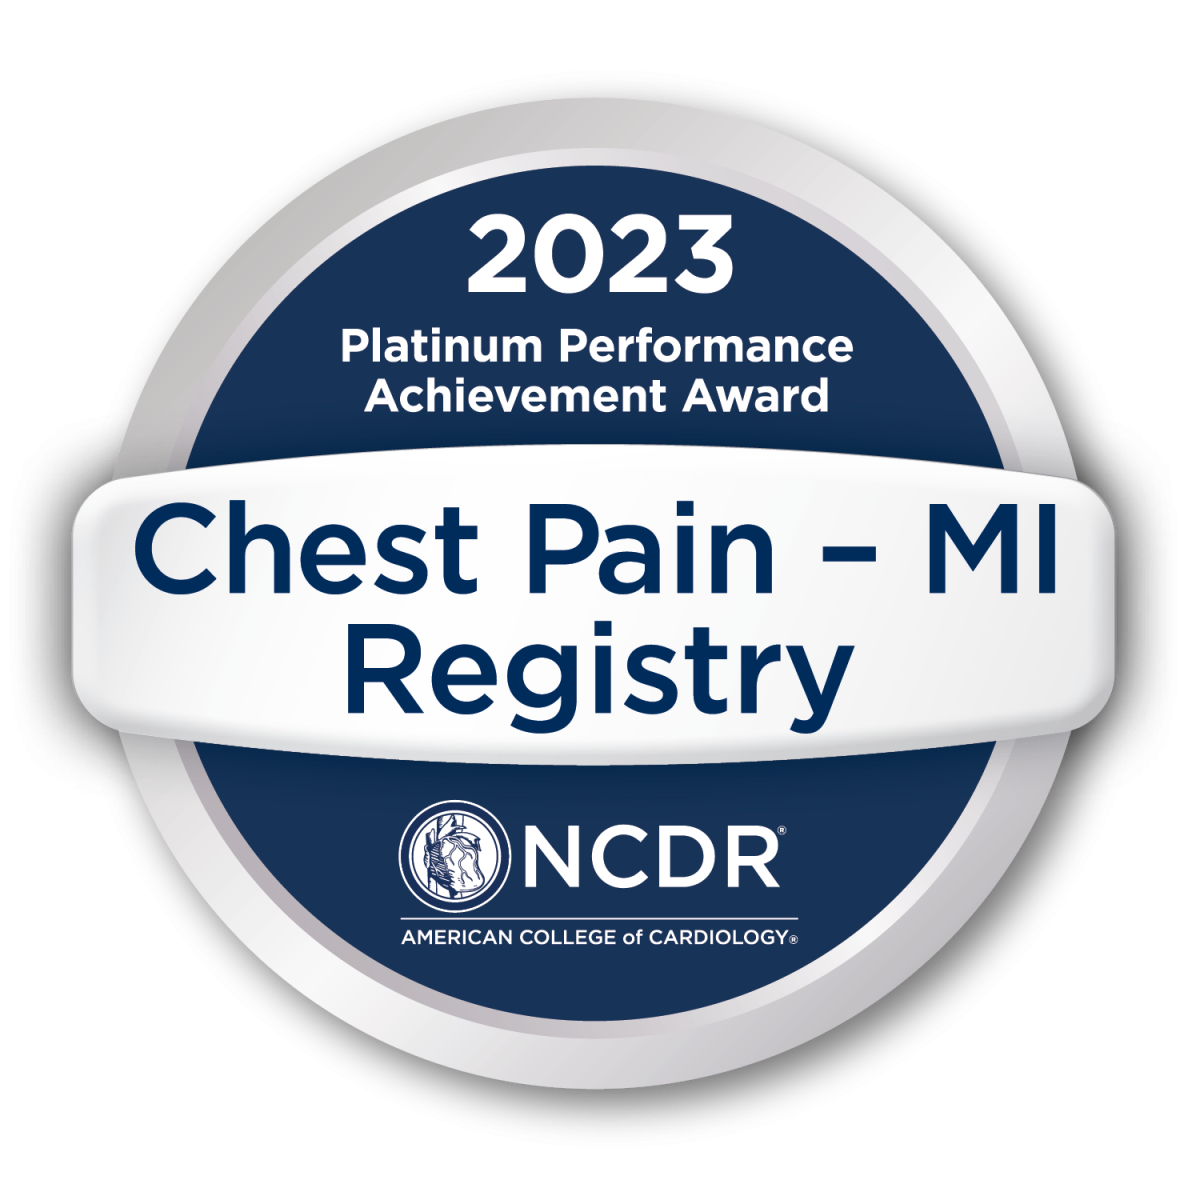 2023 Platinum Performance Achievement Award in Chest Pain - MI Registry from NCDR